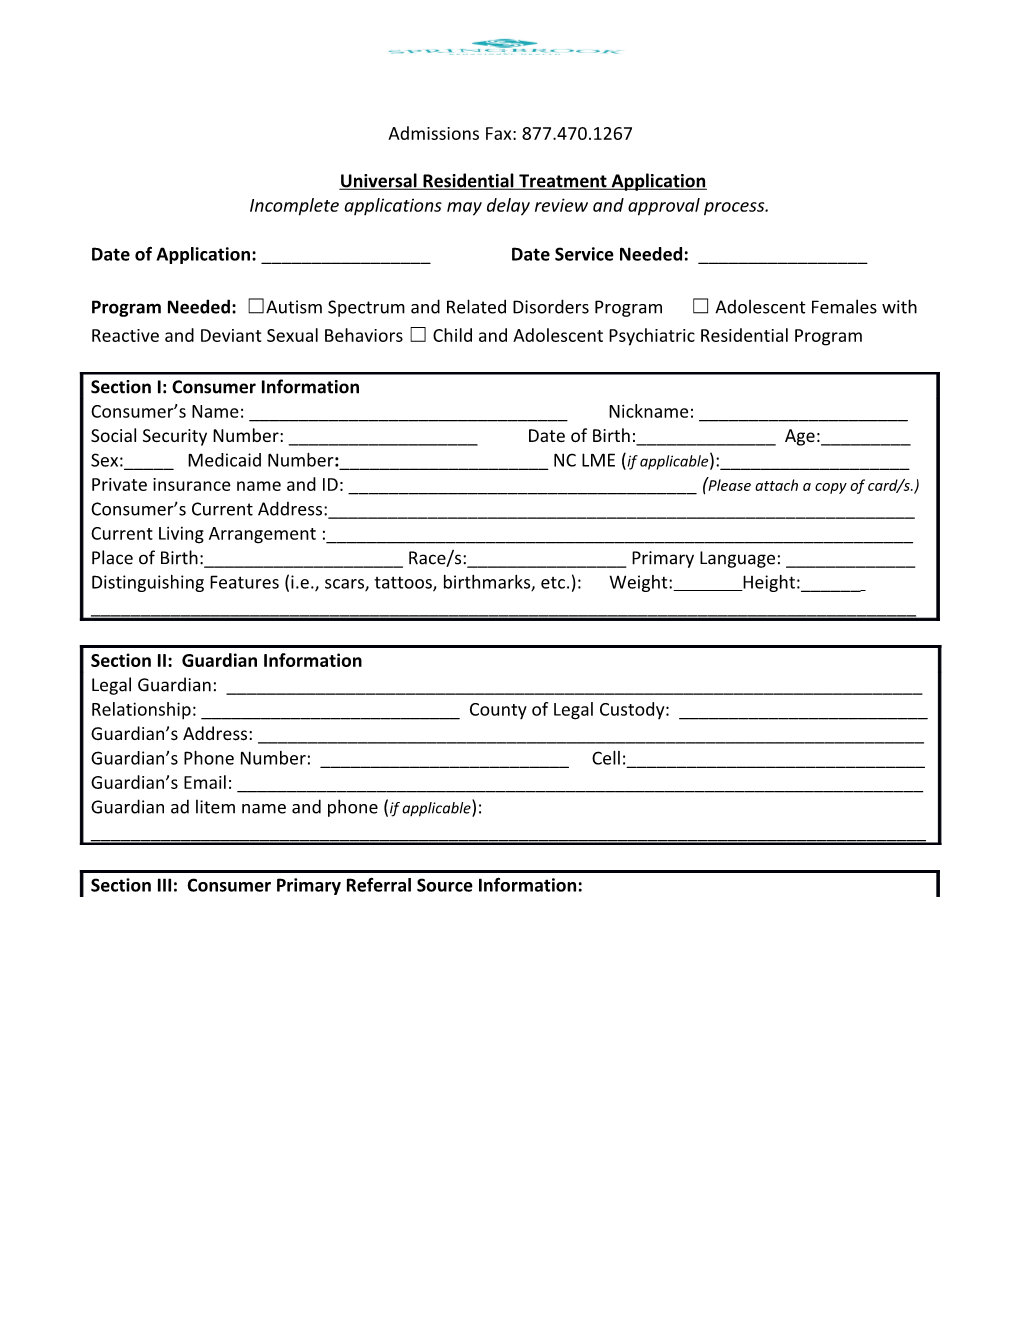 Universal Residential Treatment Application